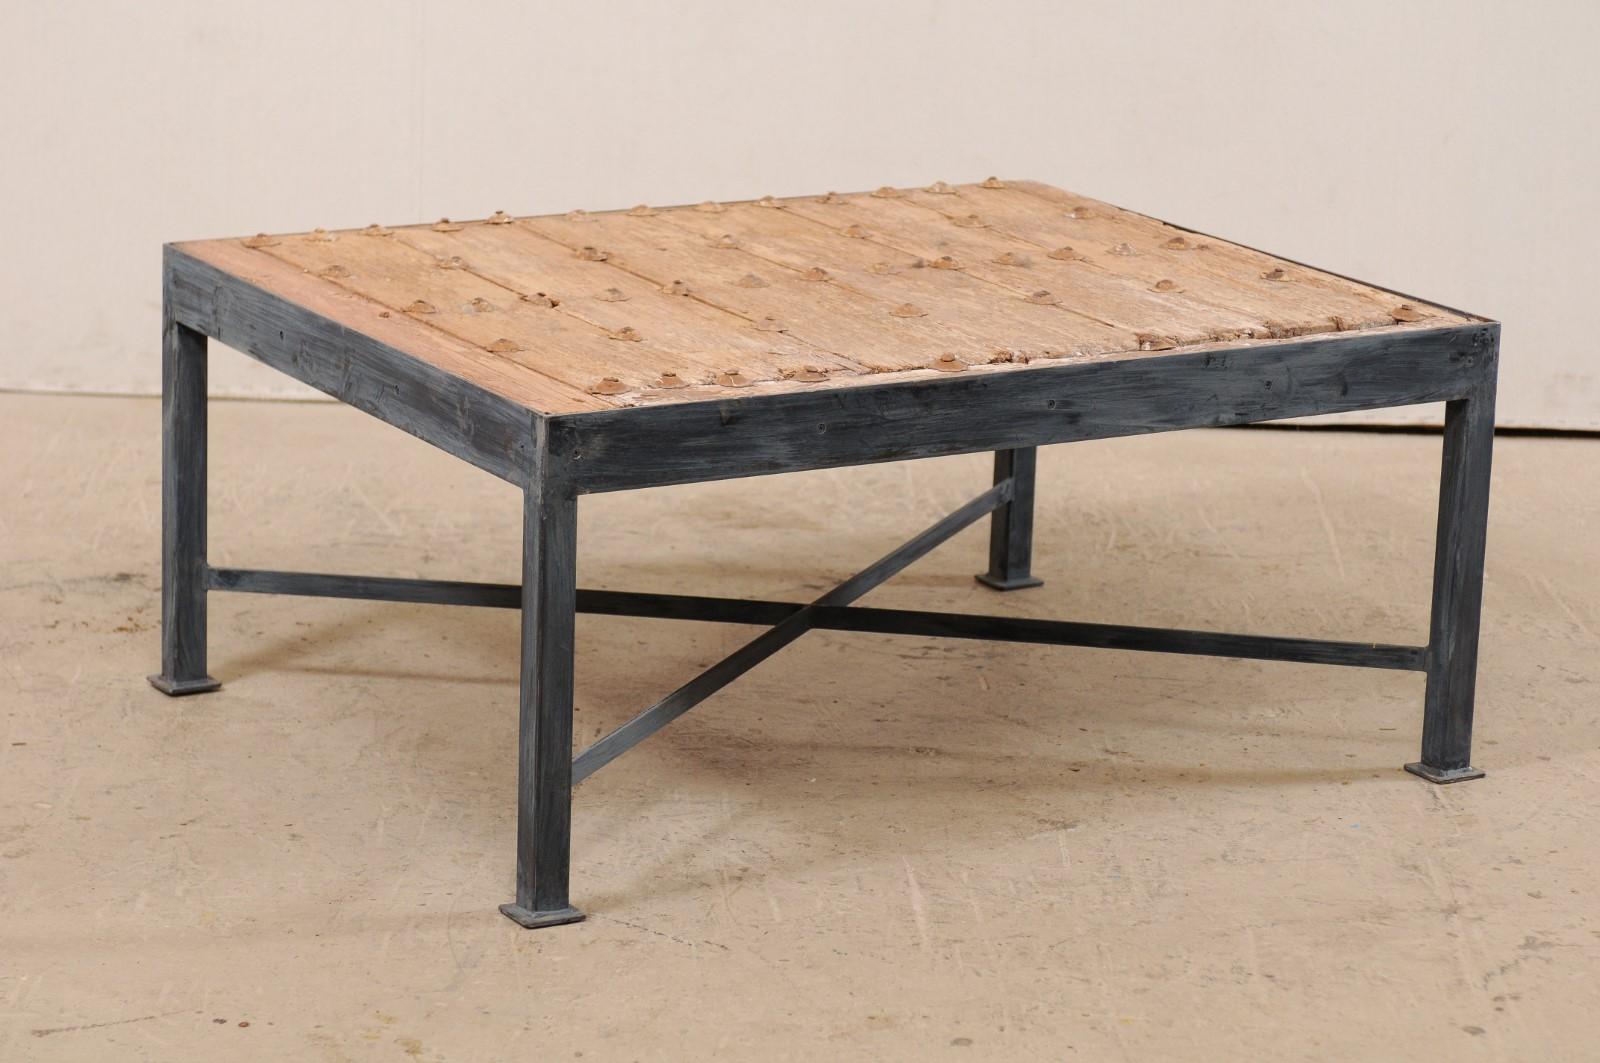 This is a custom coffee table made from an 18th century Spanish door. This wonderful coffee table has been fashioned from an 18th century Spanish door, featuring a wood plank top, with beautifully weathered patina, which is adorn in rows with its